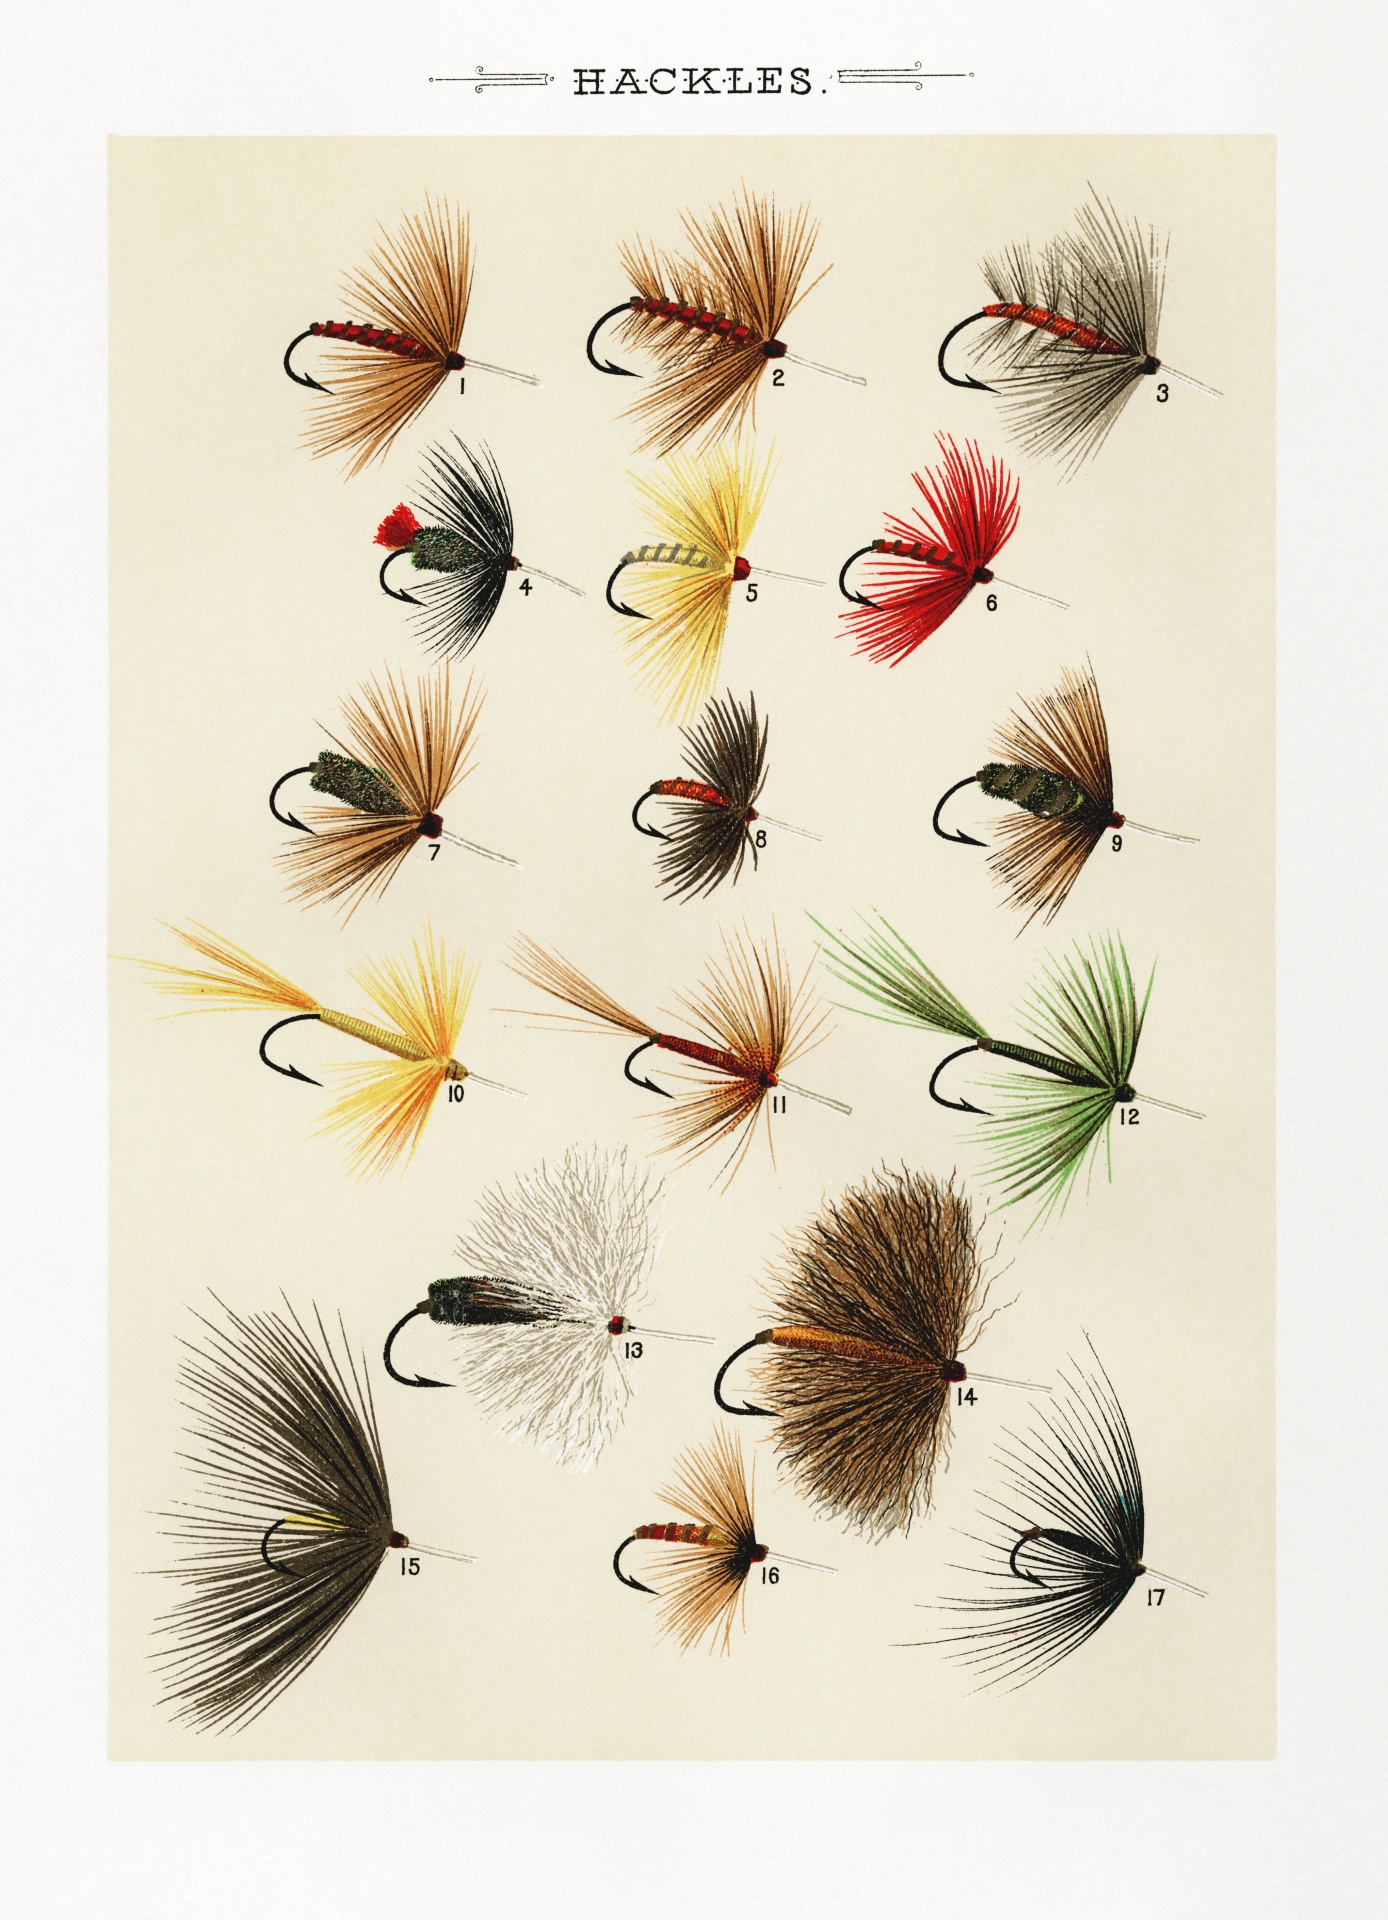 Fly fishing bait for trout salmon fish old illustration colored examples of bait flies picture restored spots removed